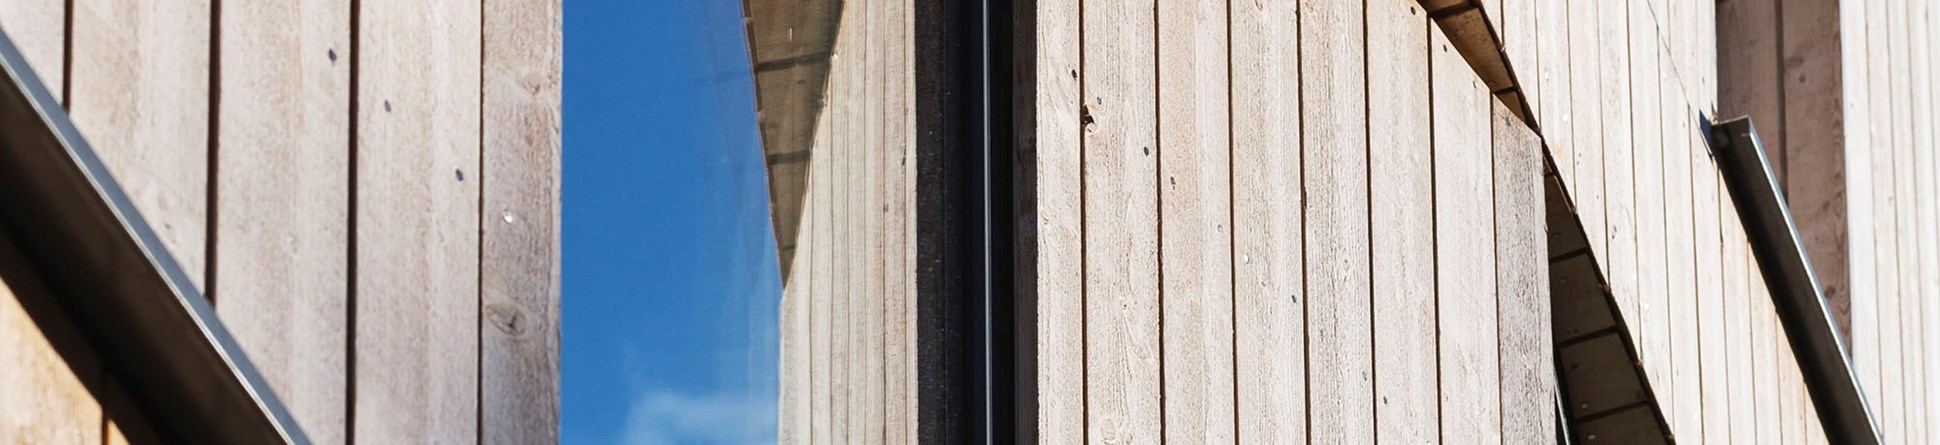 Detail of exterior wooden wall panelling and window